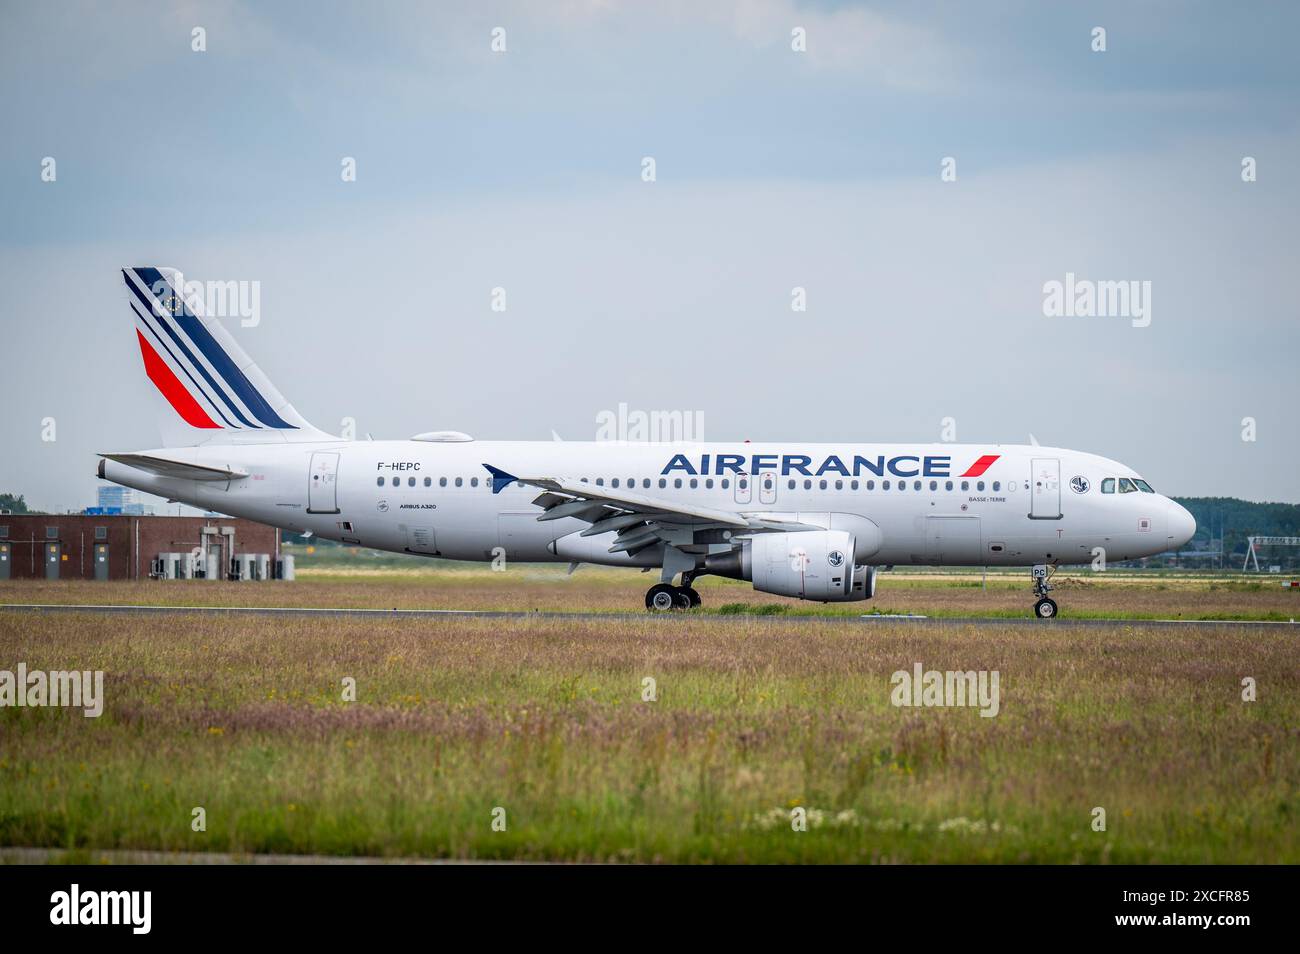 An aircraft from the French airline Airfrance. ANP/Hollandse Hoogte/Josh Walet netherlands out - belgium out Stock Photo